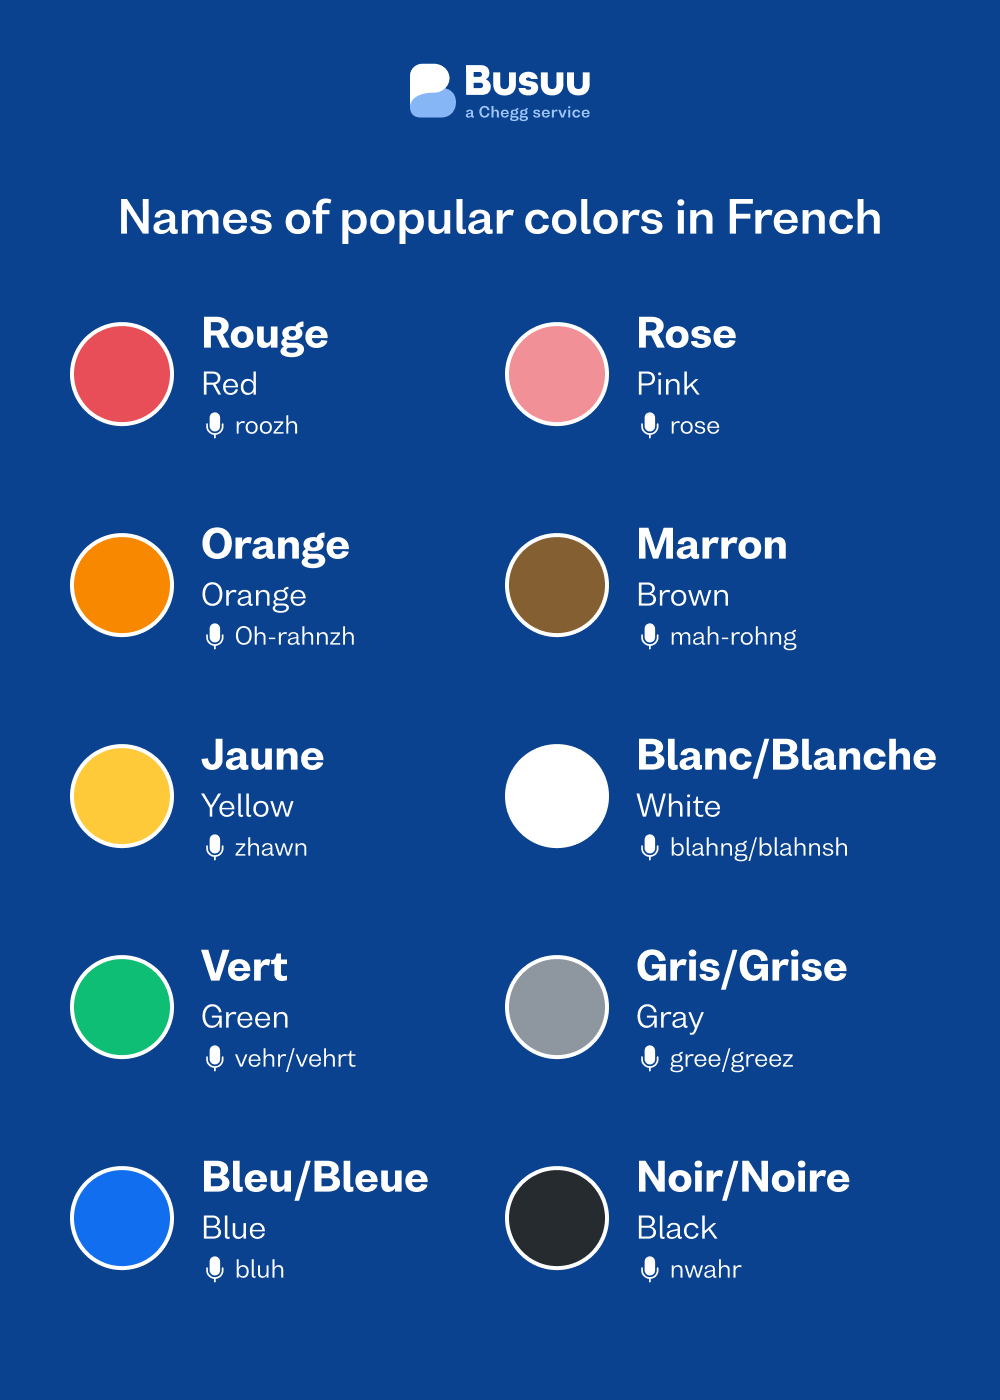 What is the feminine of Bleu in French?